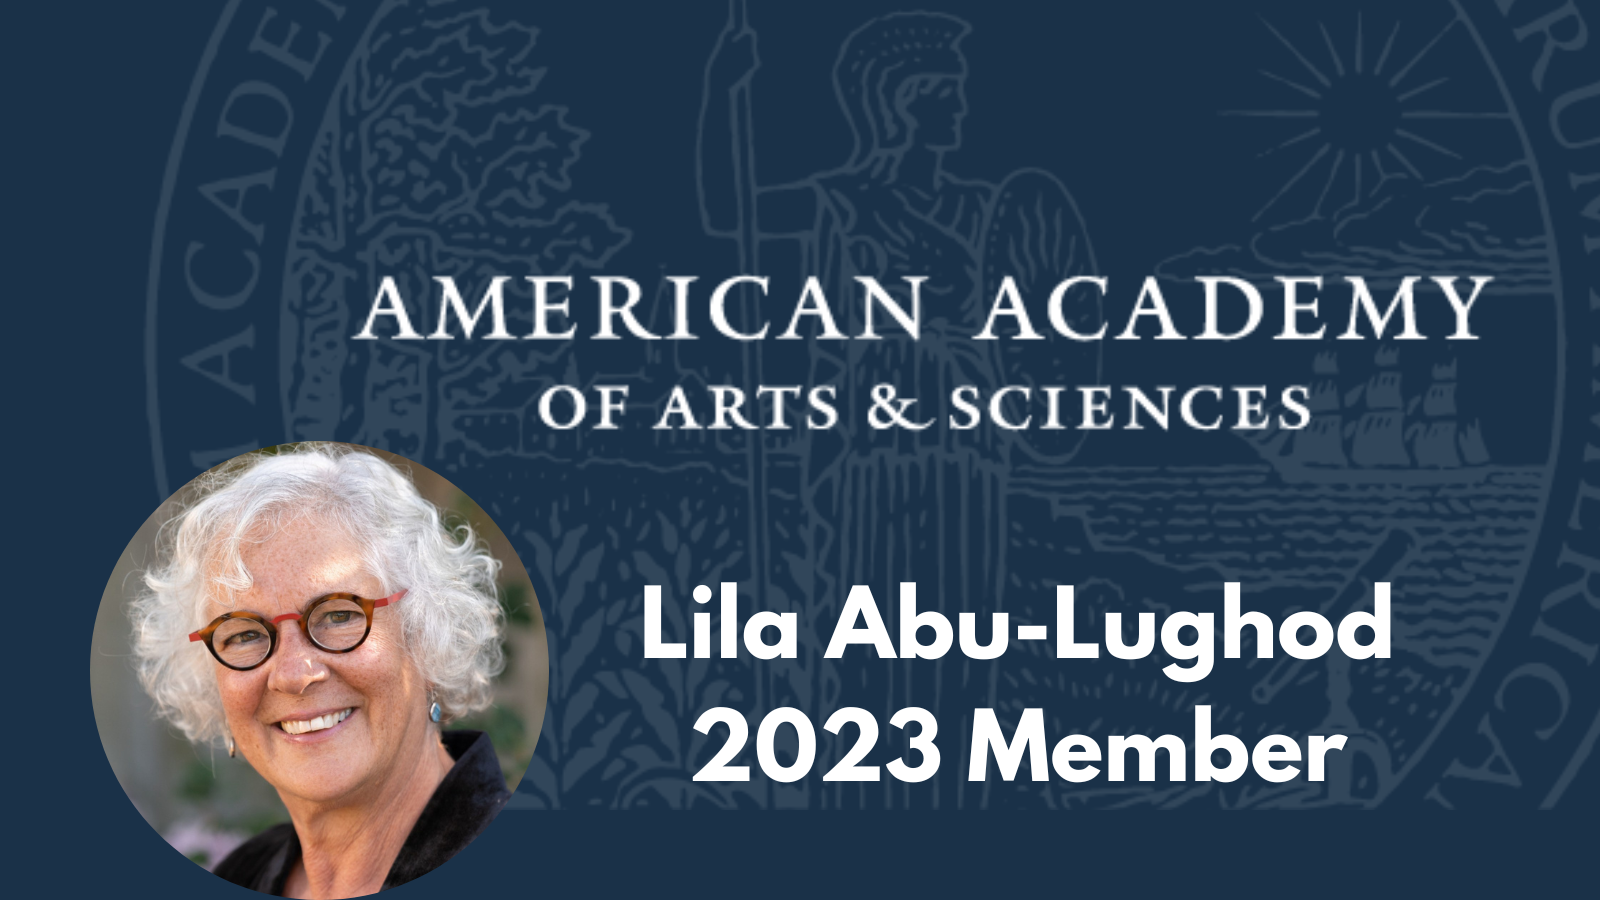 Image with blue background with text that reads American Academy of Arts & Sciences and Lila Abu-Lughod 2023 Member